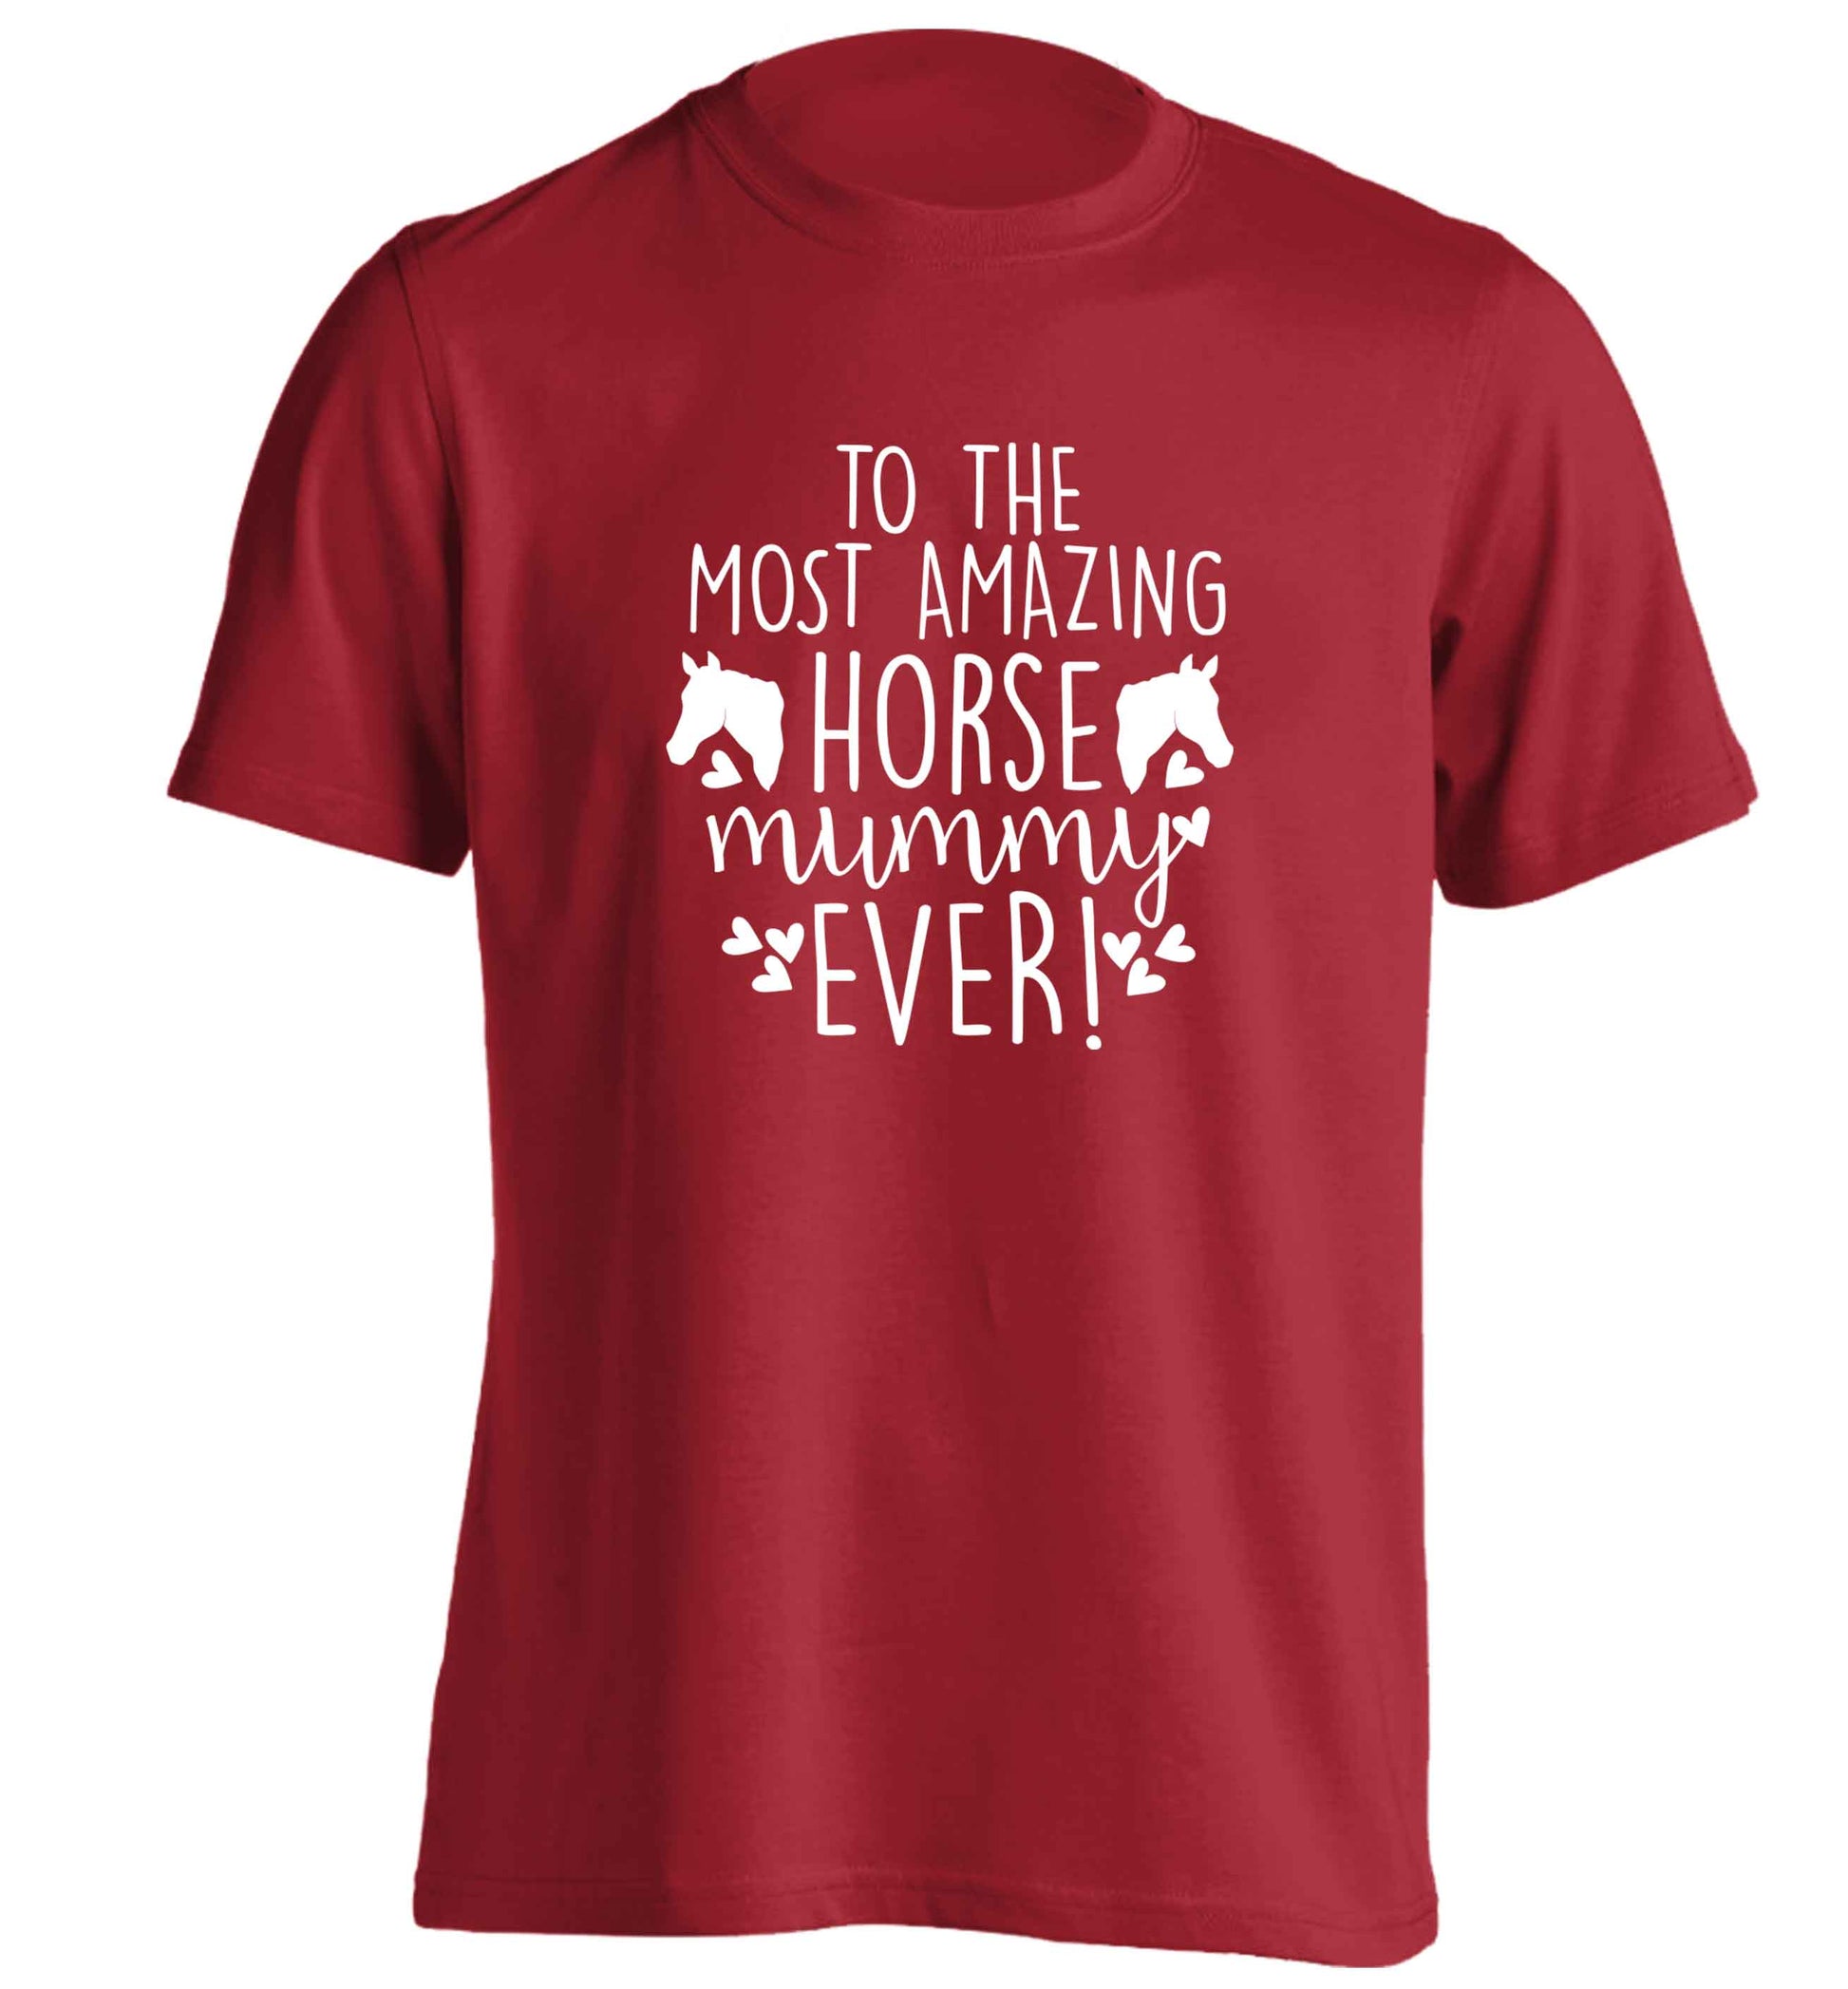 To the most amazing horse mummy ever! adults unisex red Tshirt 2XL